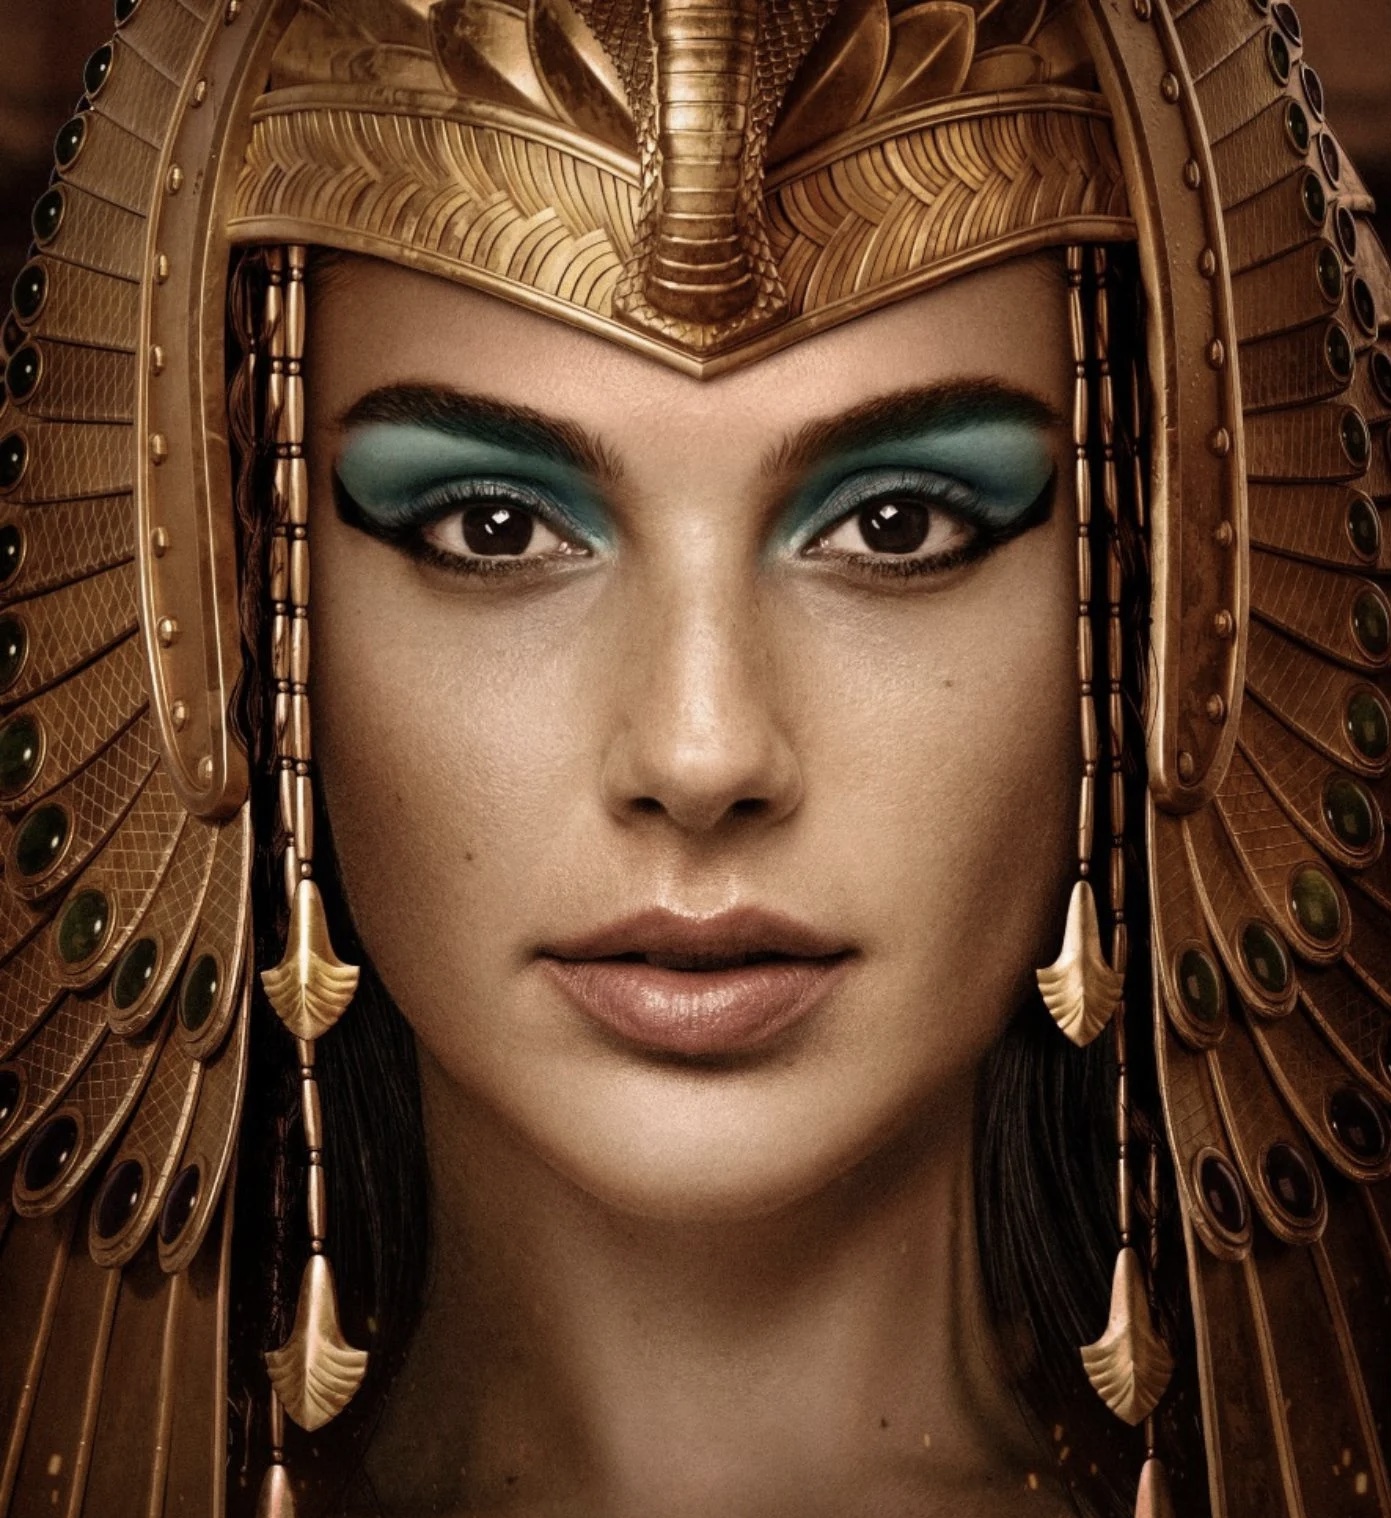 Israeli actress Gal Gadot to portray Egypt's Queen Cleopatra.